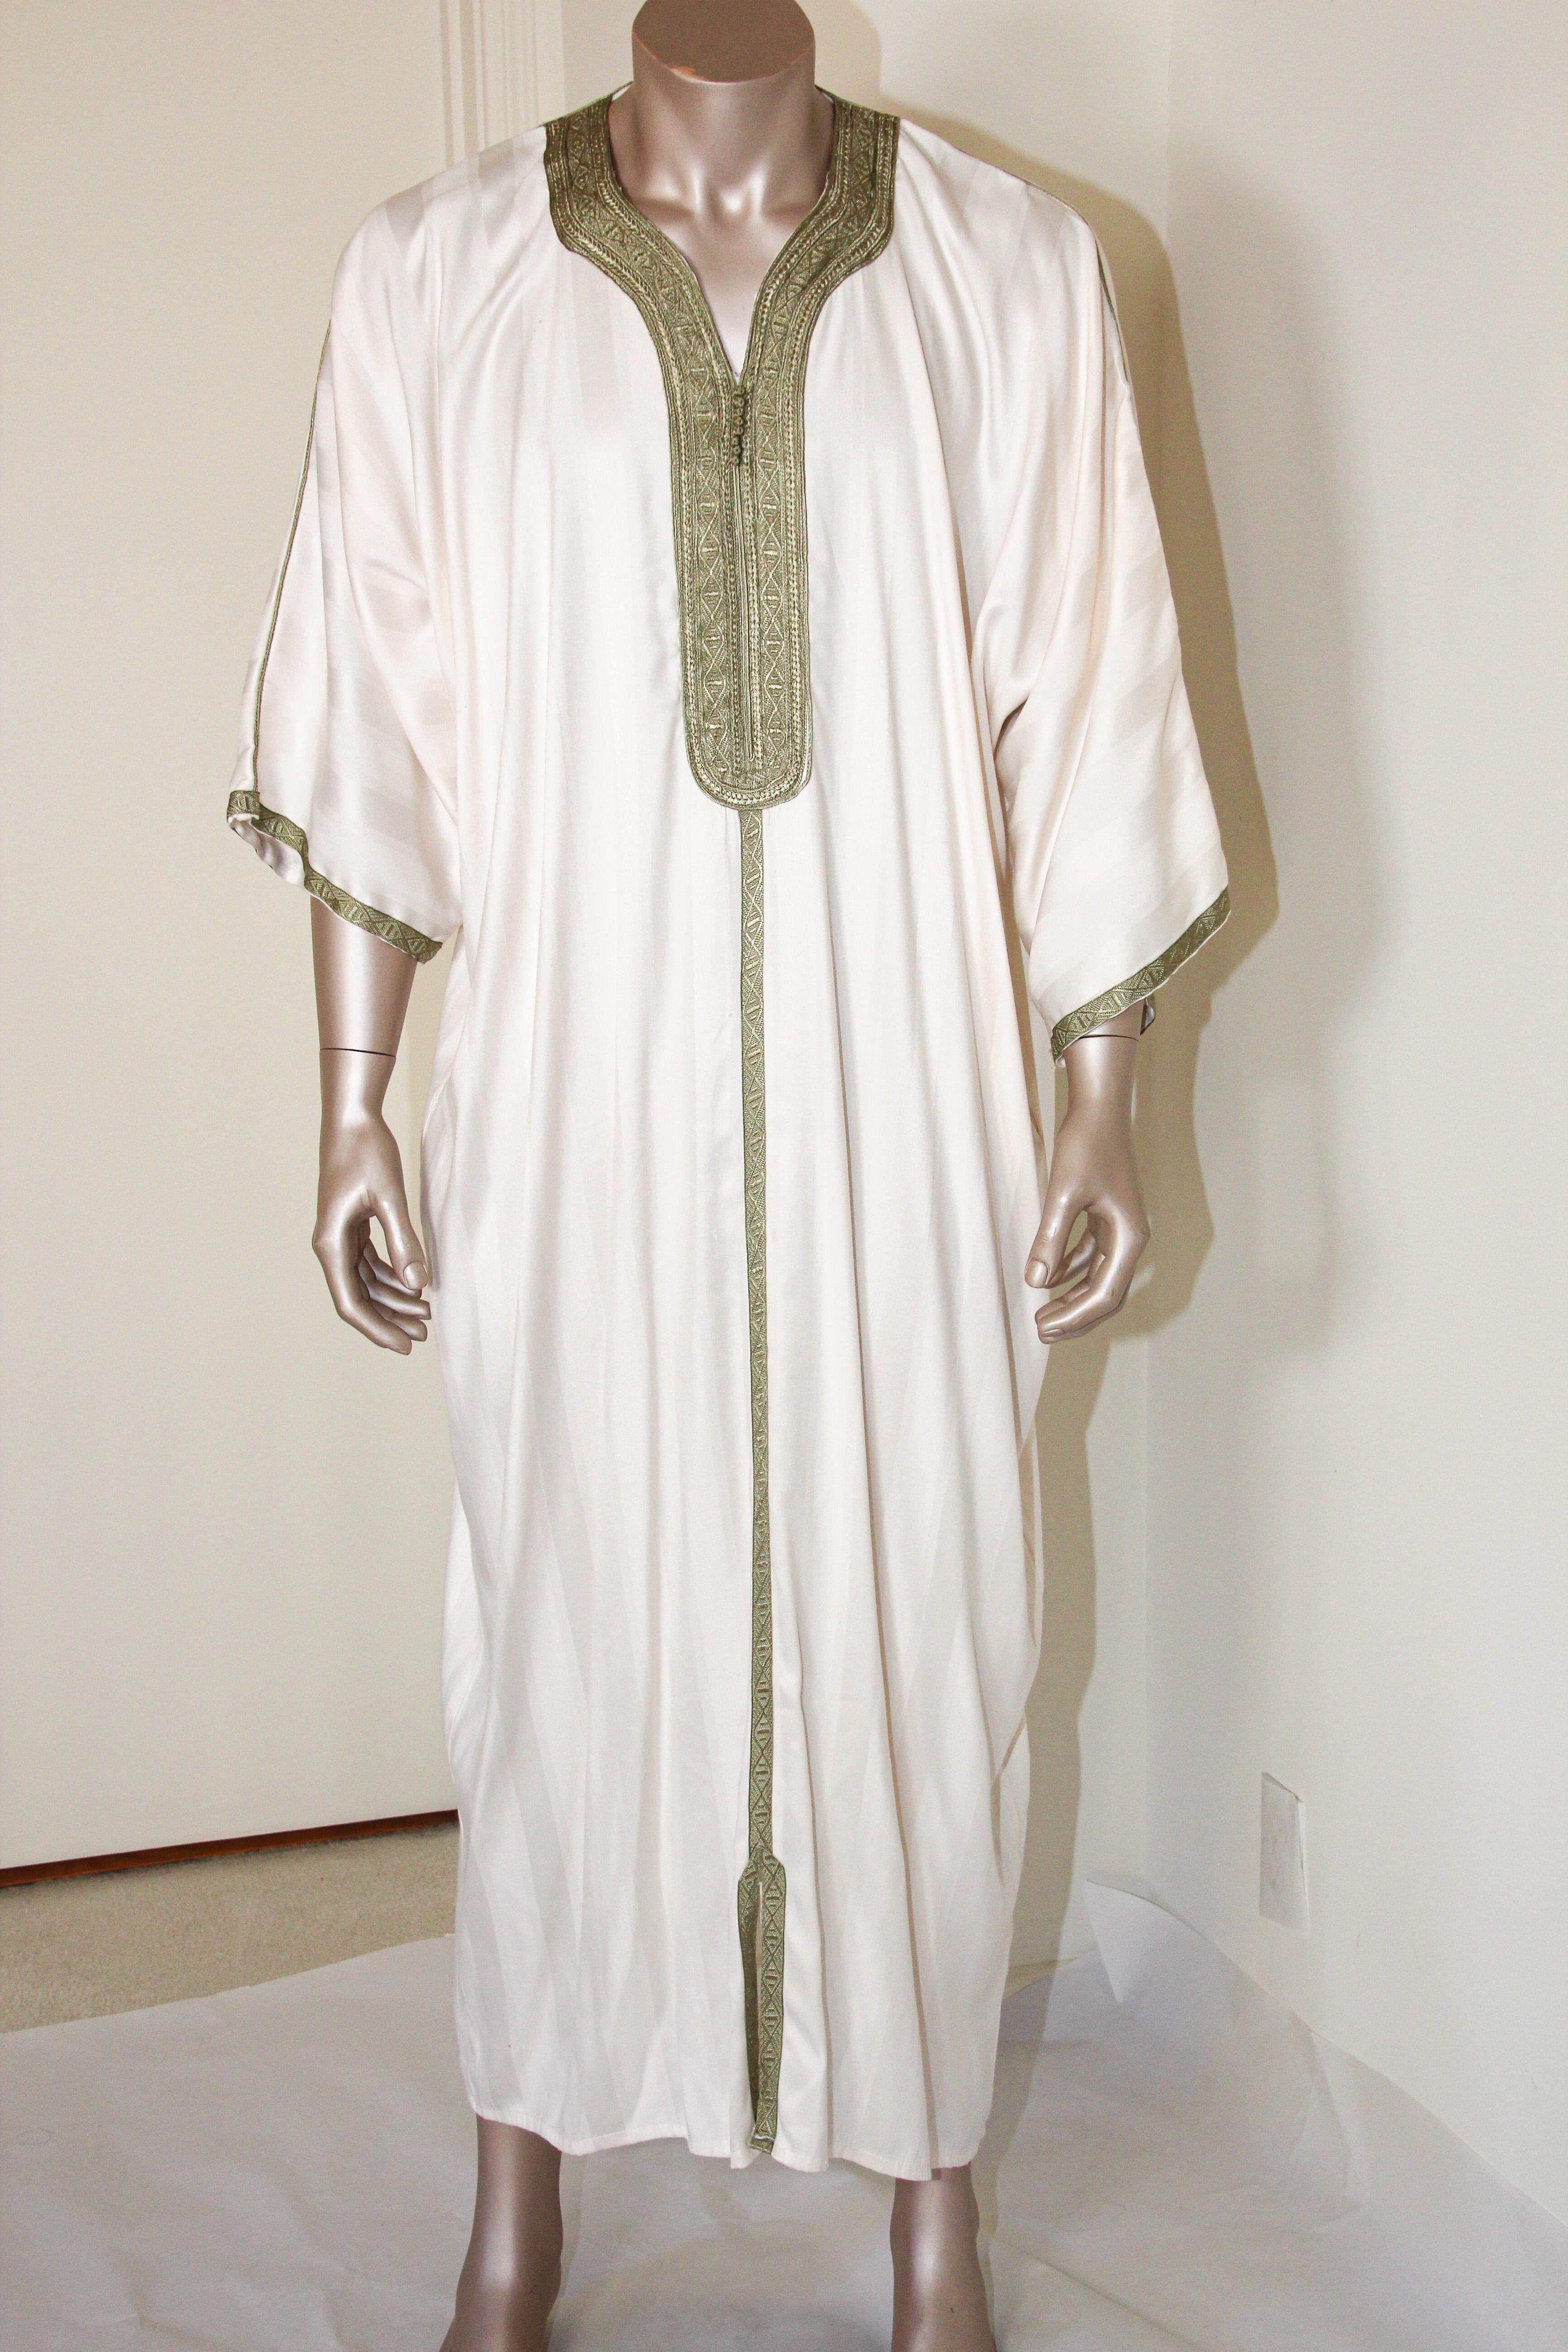 Moroccan gentleman vintage caftan embellished with green trim.
In Morocco, fashion preserves its traditional style inherited from great civilizations that found their way to Northwest Africa, such as the Ottomans and the Moors.
Moroccan fashion has